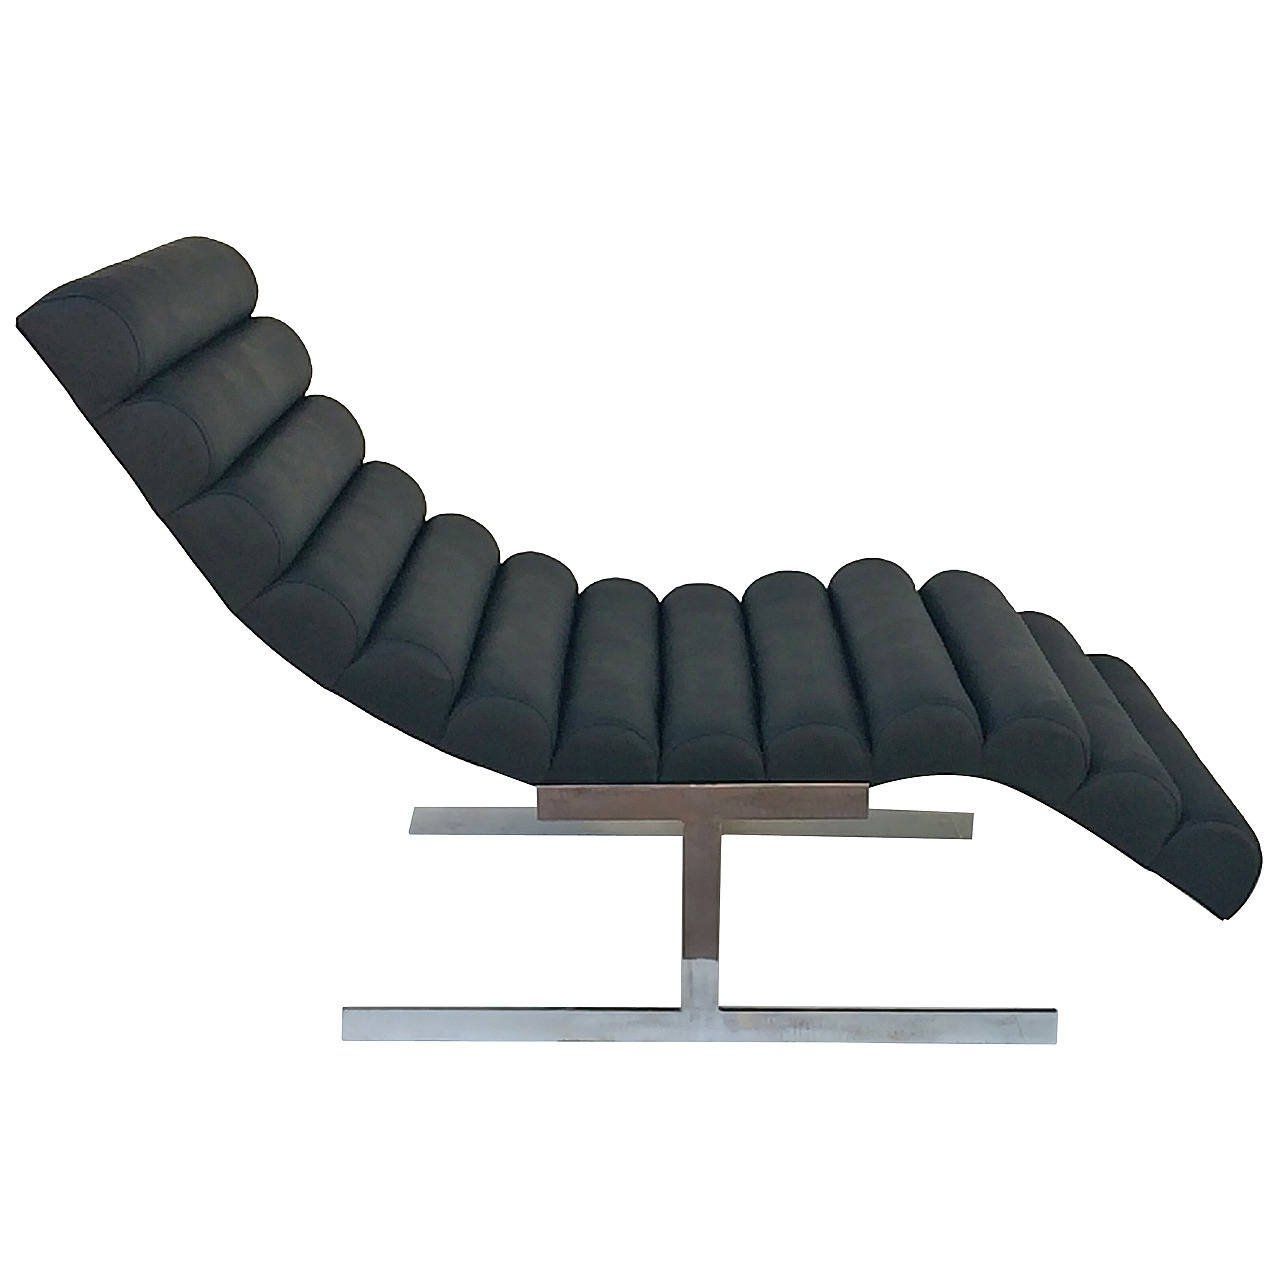 Newest Black Leather Chaise Lounges In Black Channeled Leather Chaise Loungemilo Baughman At 1stdibs (Photo 7 of 15)